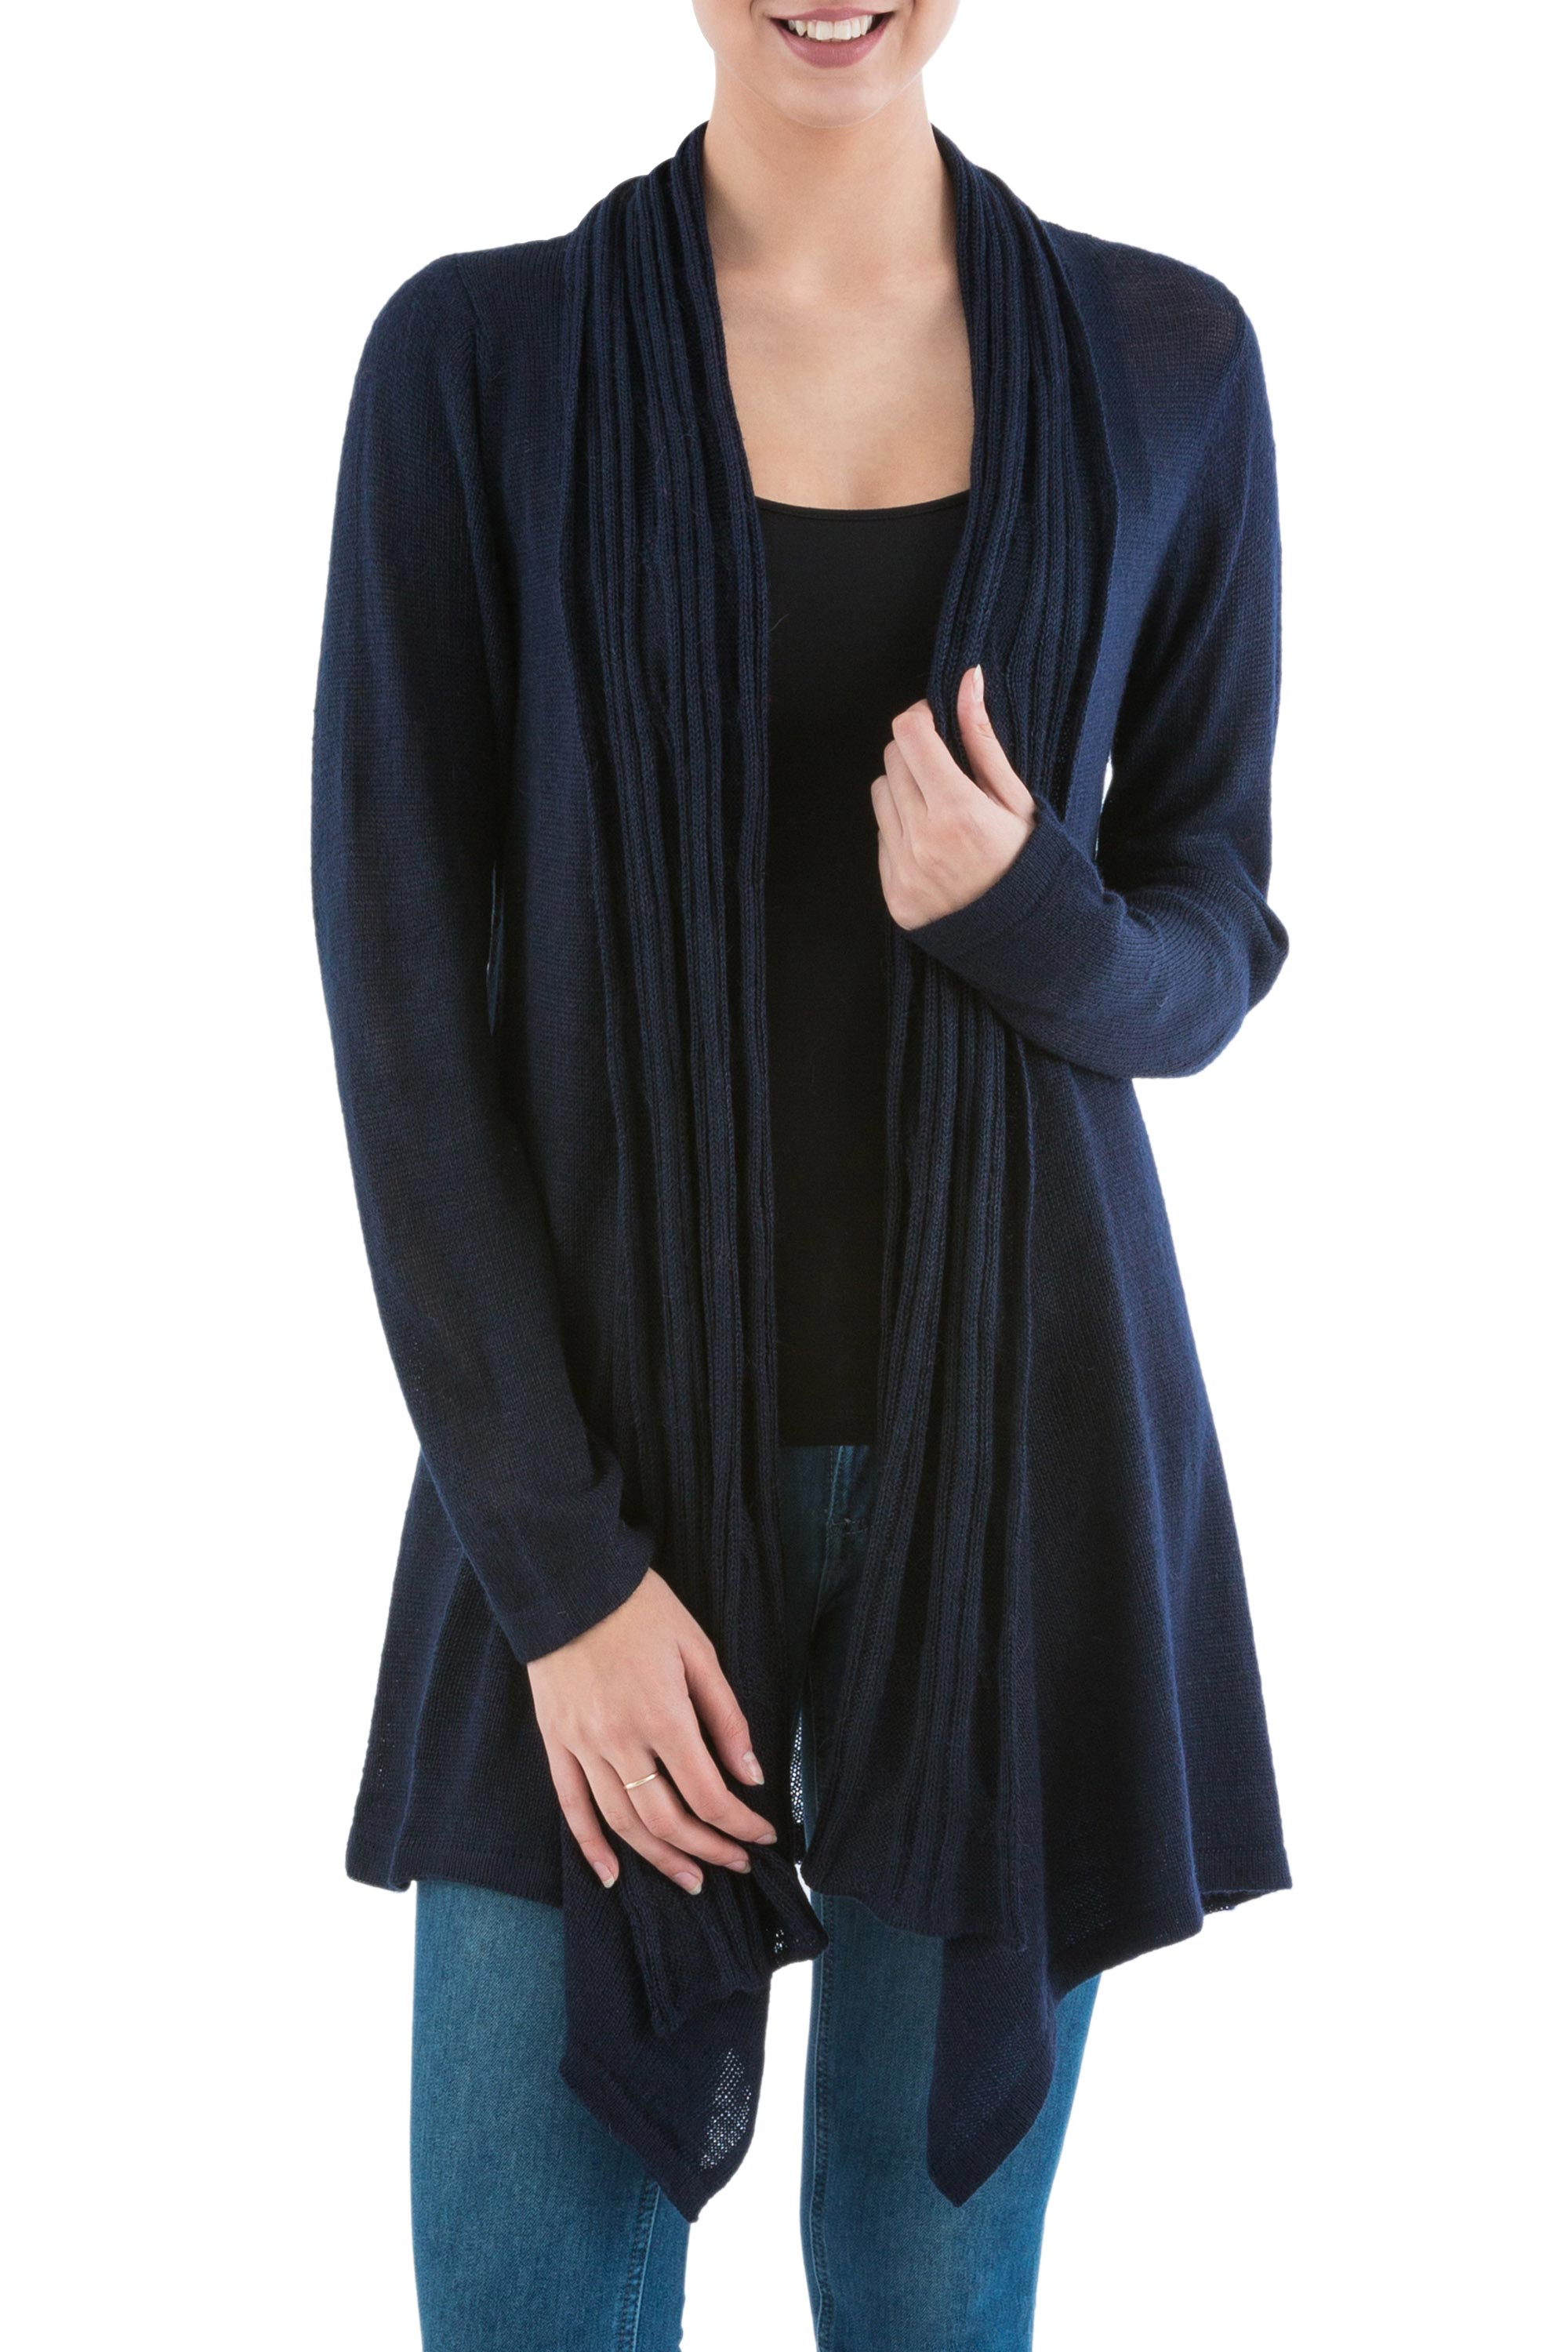 Long Sleeved Navy Blue Cardigan Sweater from Peru - Navy Waterfall ...